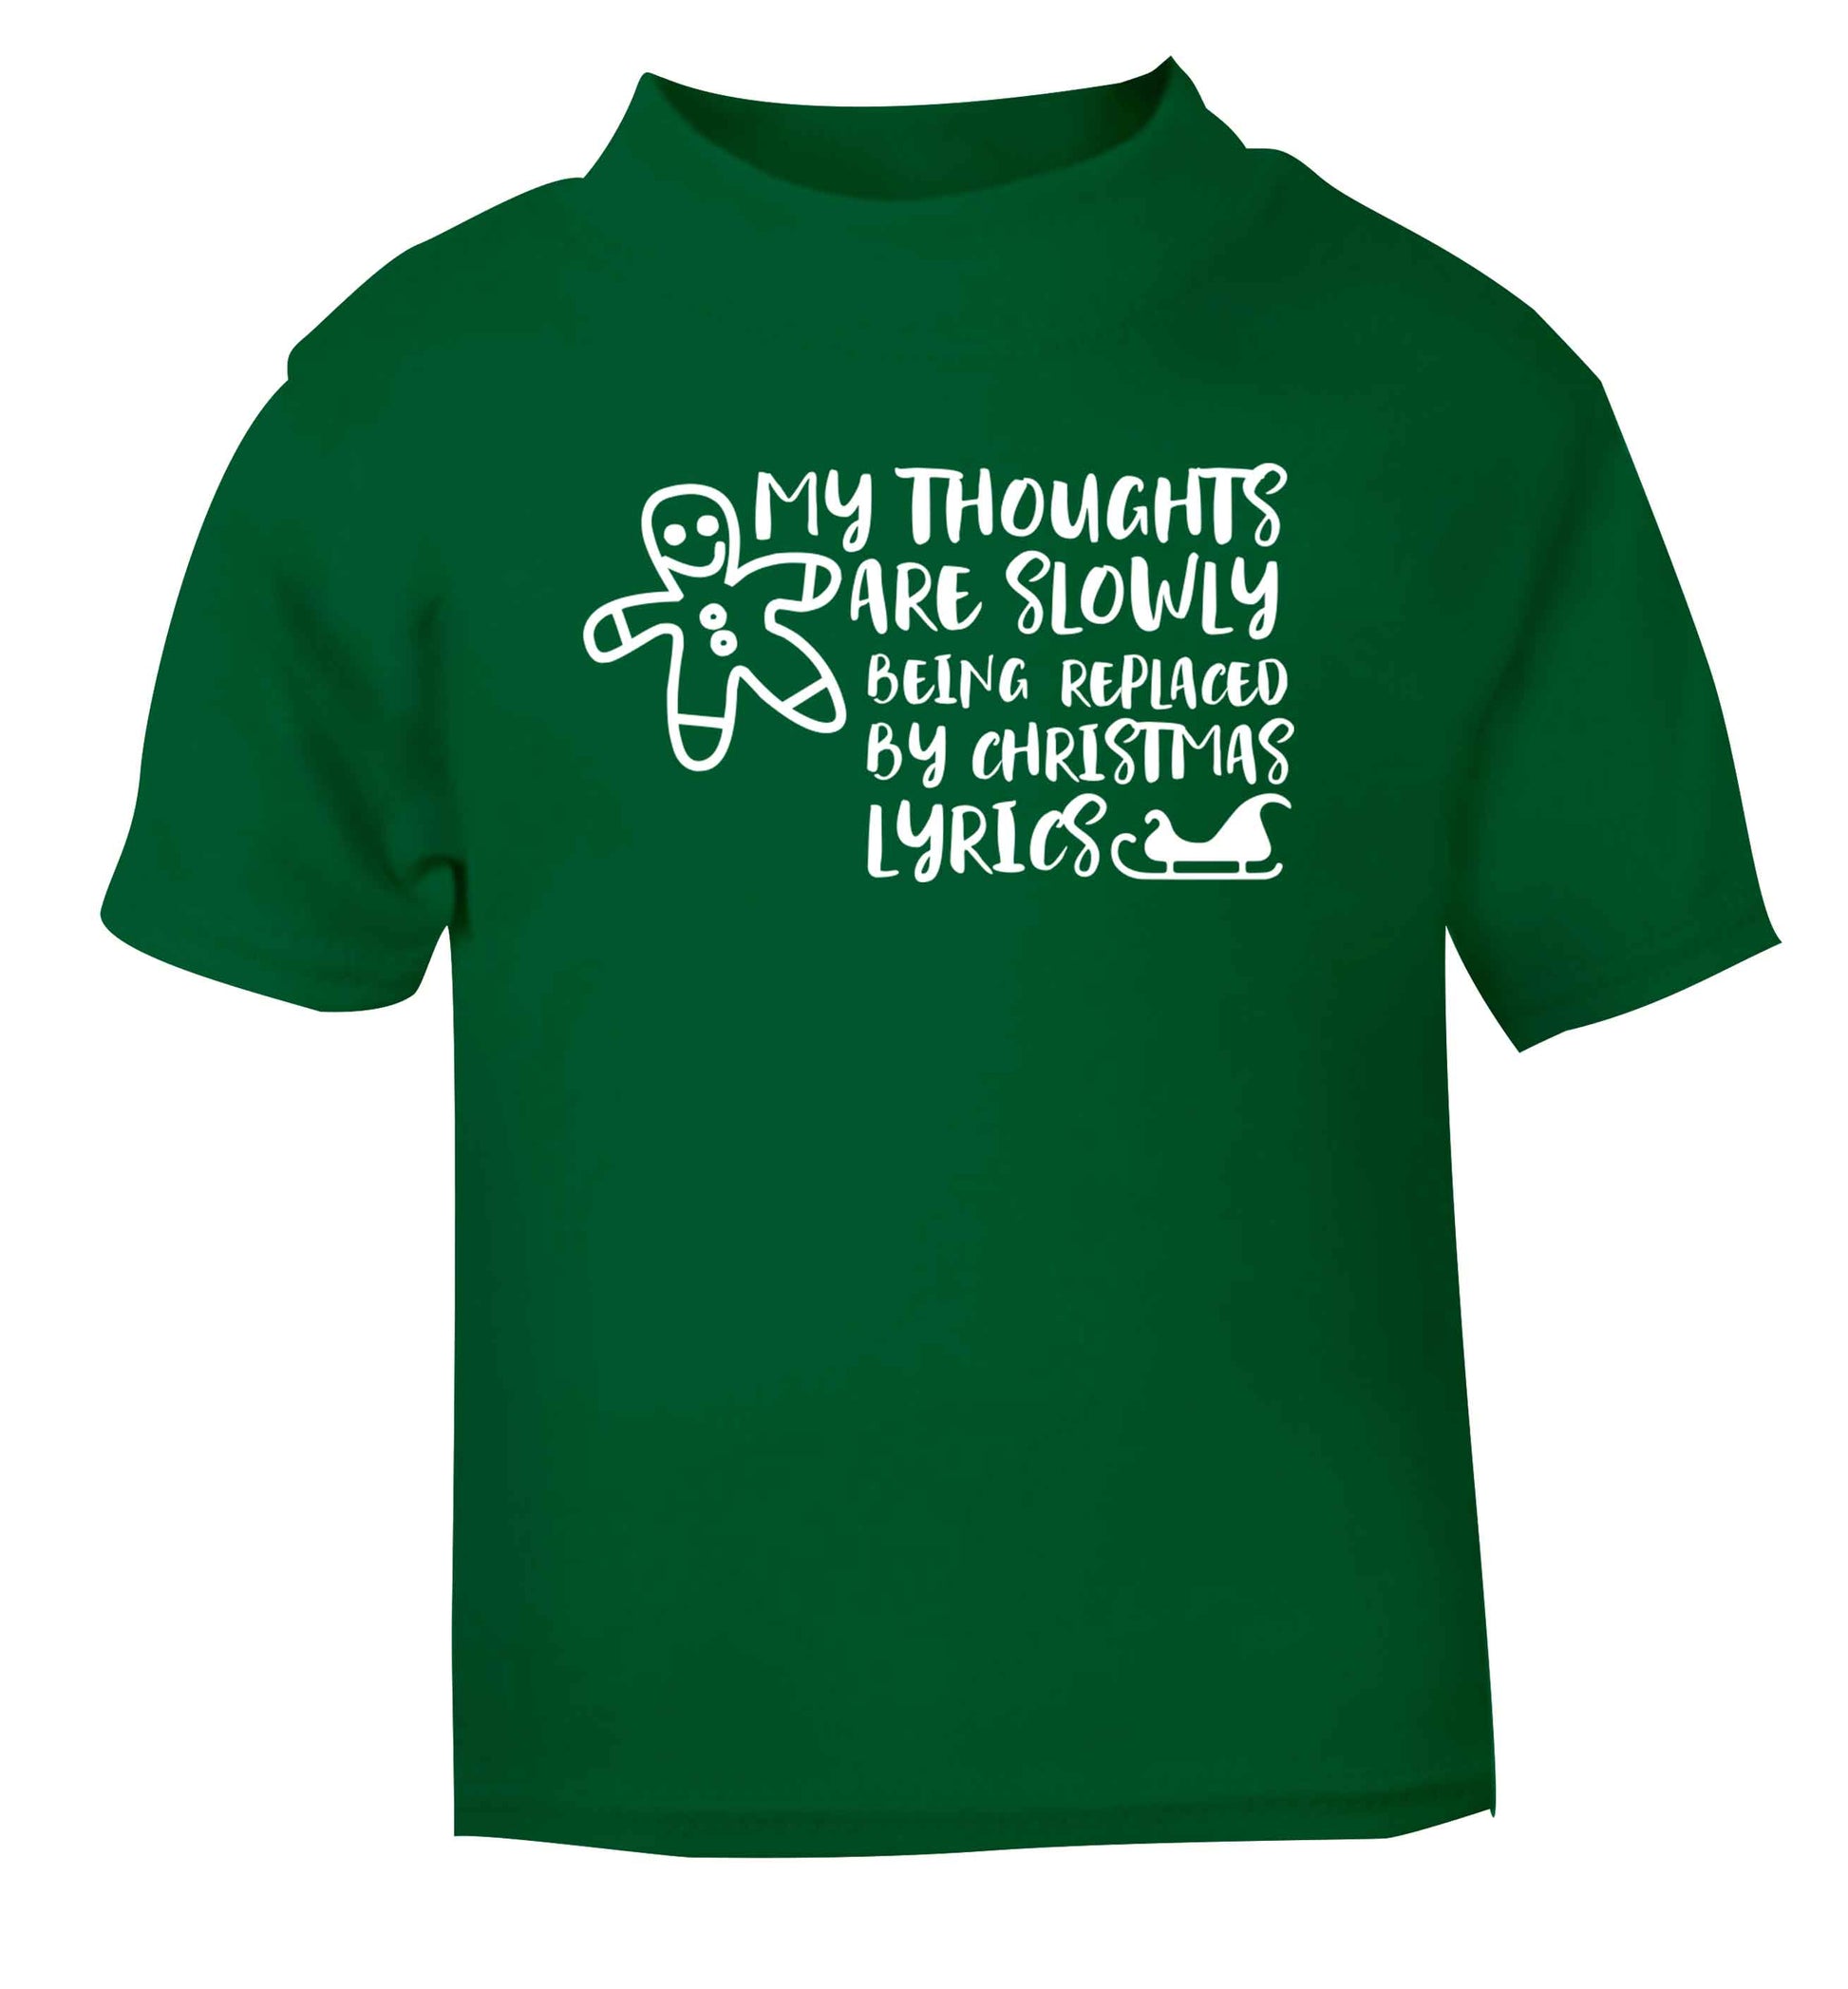 My thoughts are slowly being replaced by Christmas lyrics green Baby Toddler Tshirt 2 Years